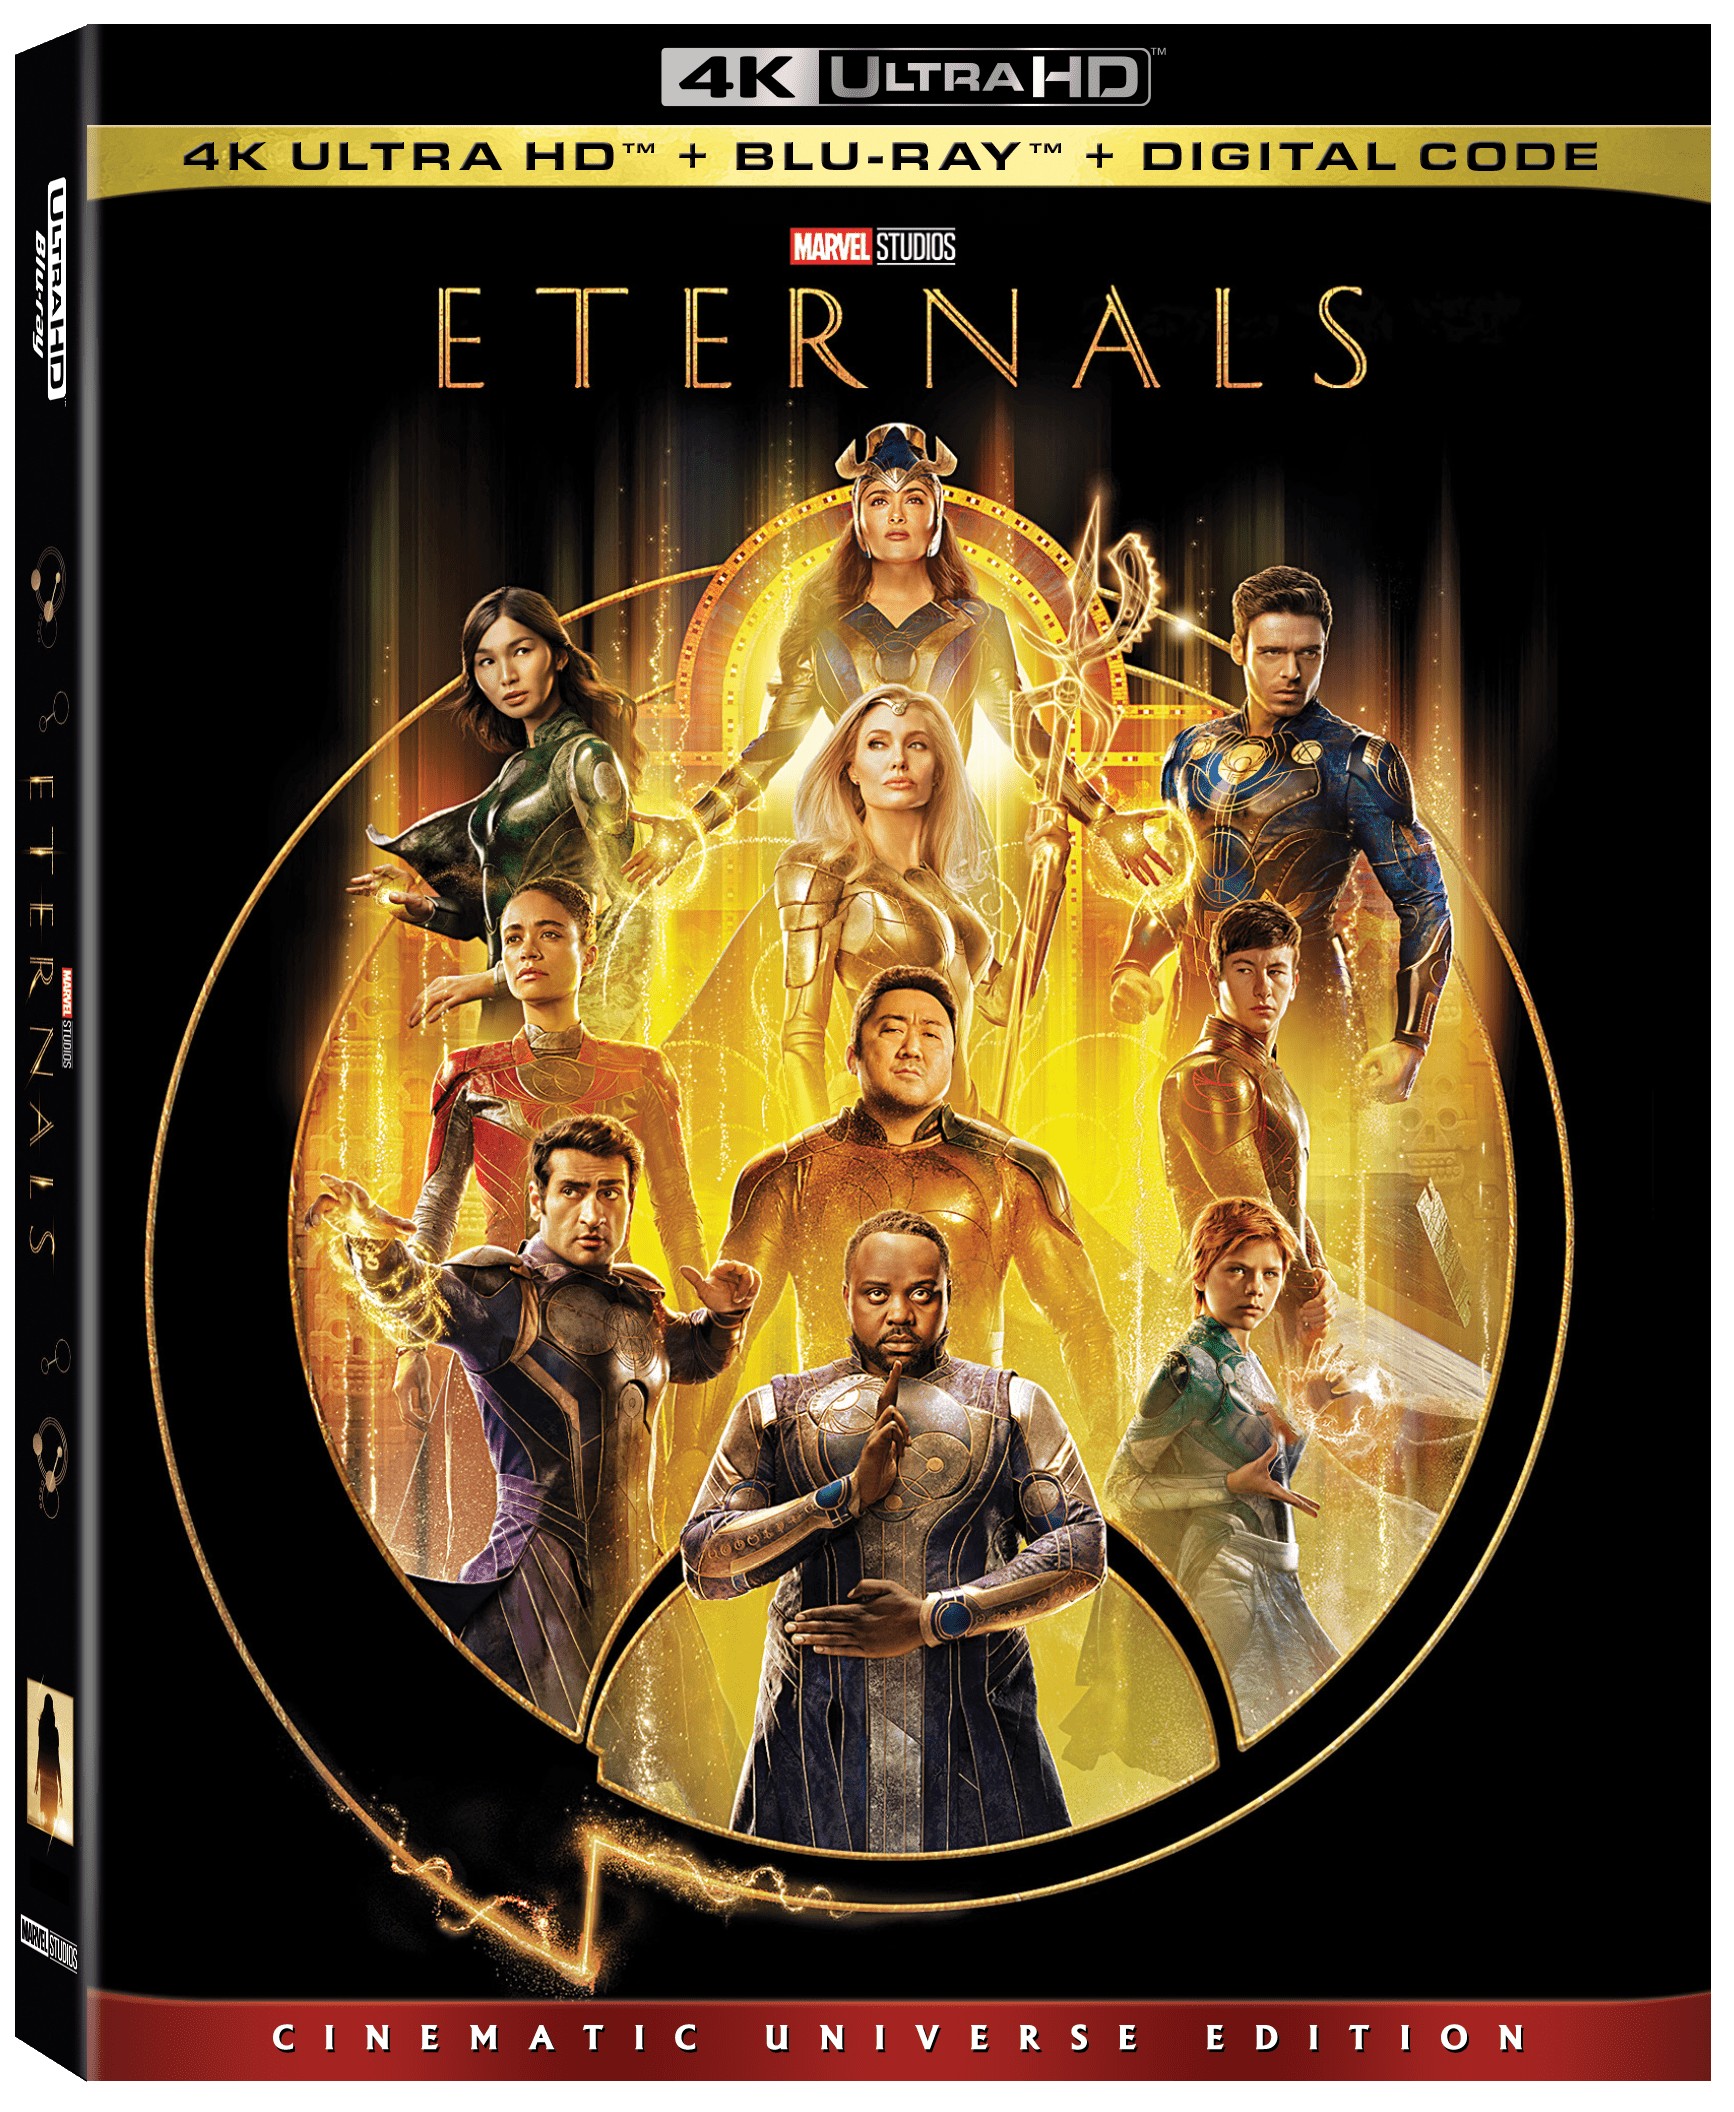 Arrow Video, Eternals and Film Comment make 2021 and 2022 look brighter 22